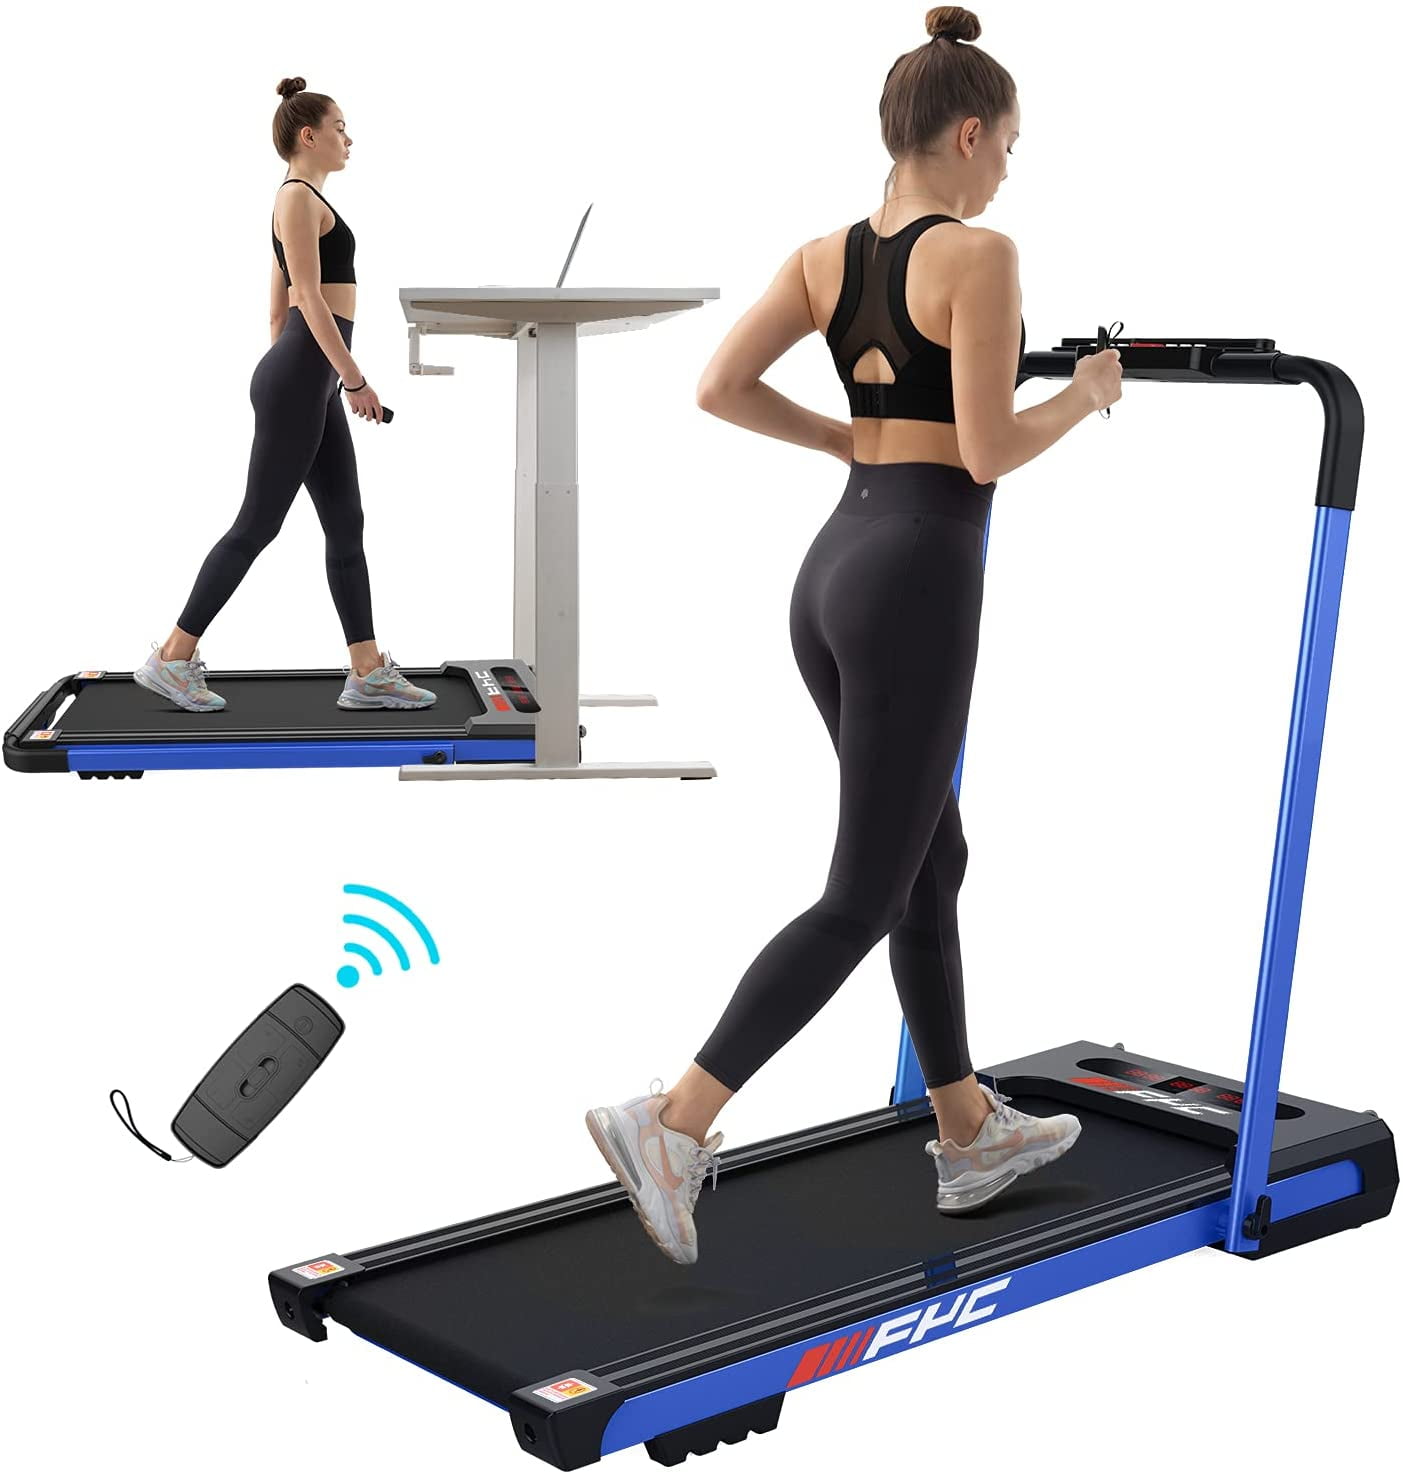 Remote Control & LED Display Walking Running Jogging for Home Office Use FYC Under Desk Treadmill Installation-Free Foldable Treadmill Compact Electric Running Machine 2 in 1 Folding Treadmill for Home 2.5 HP 